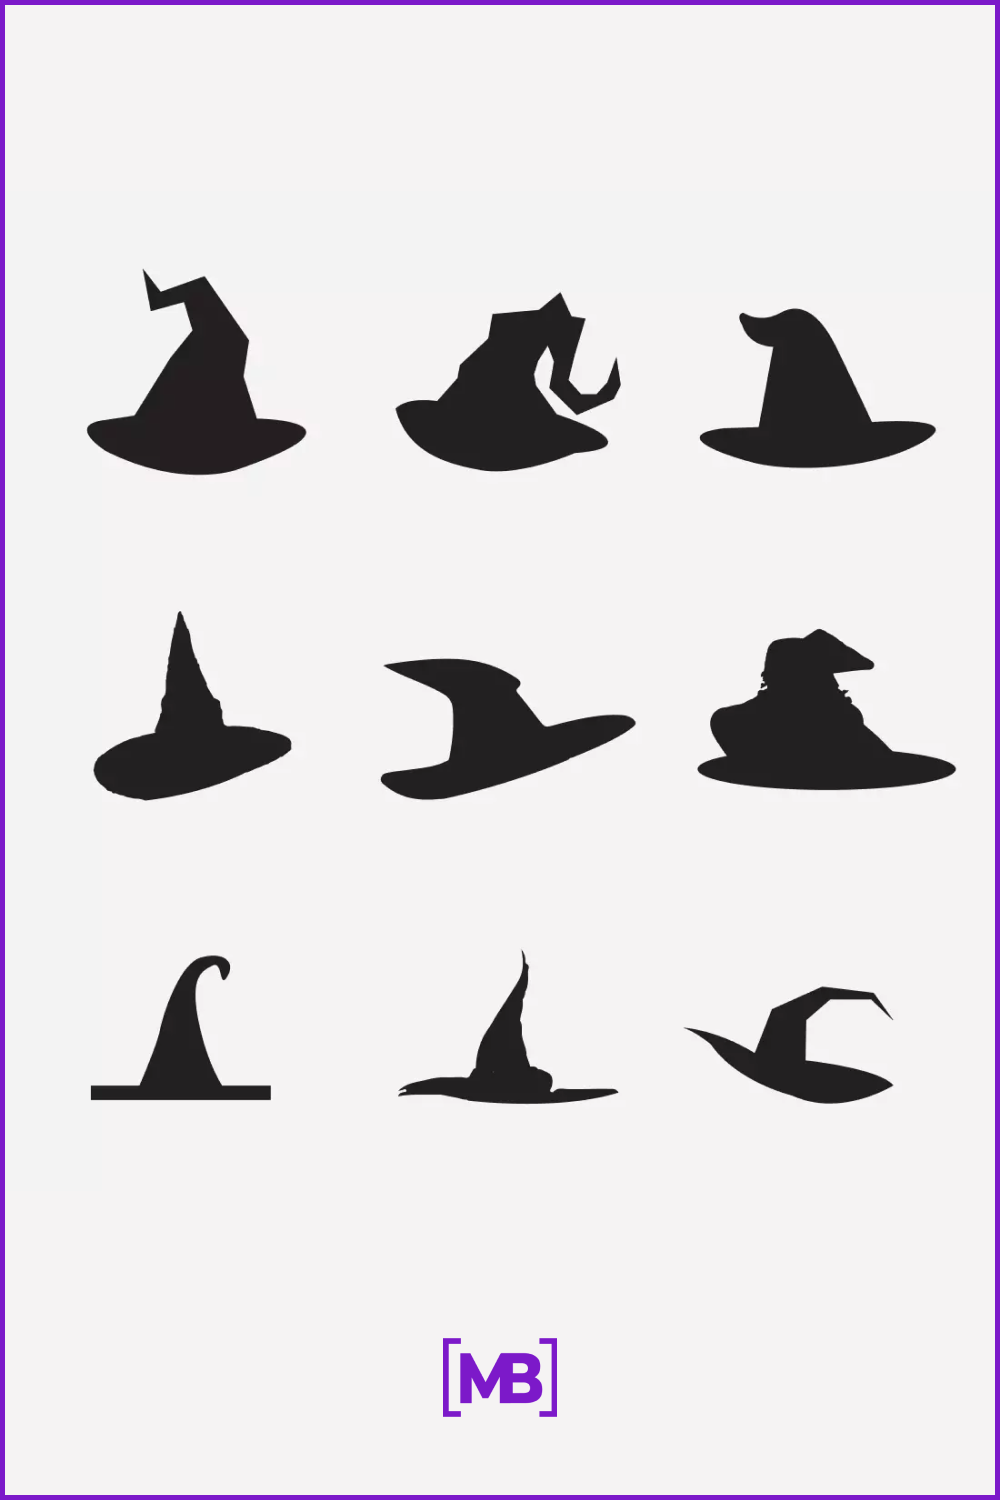 Variants of different black witch hats.